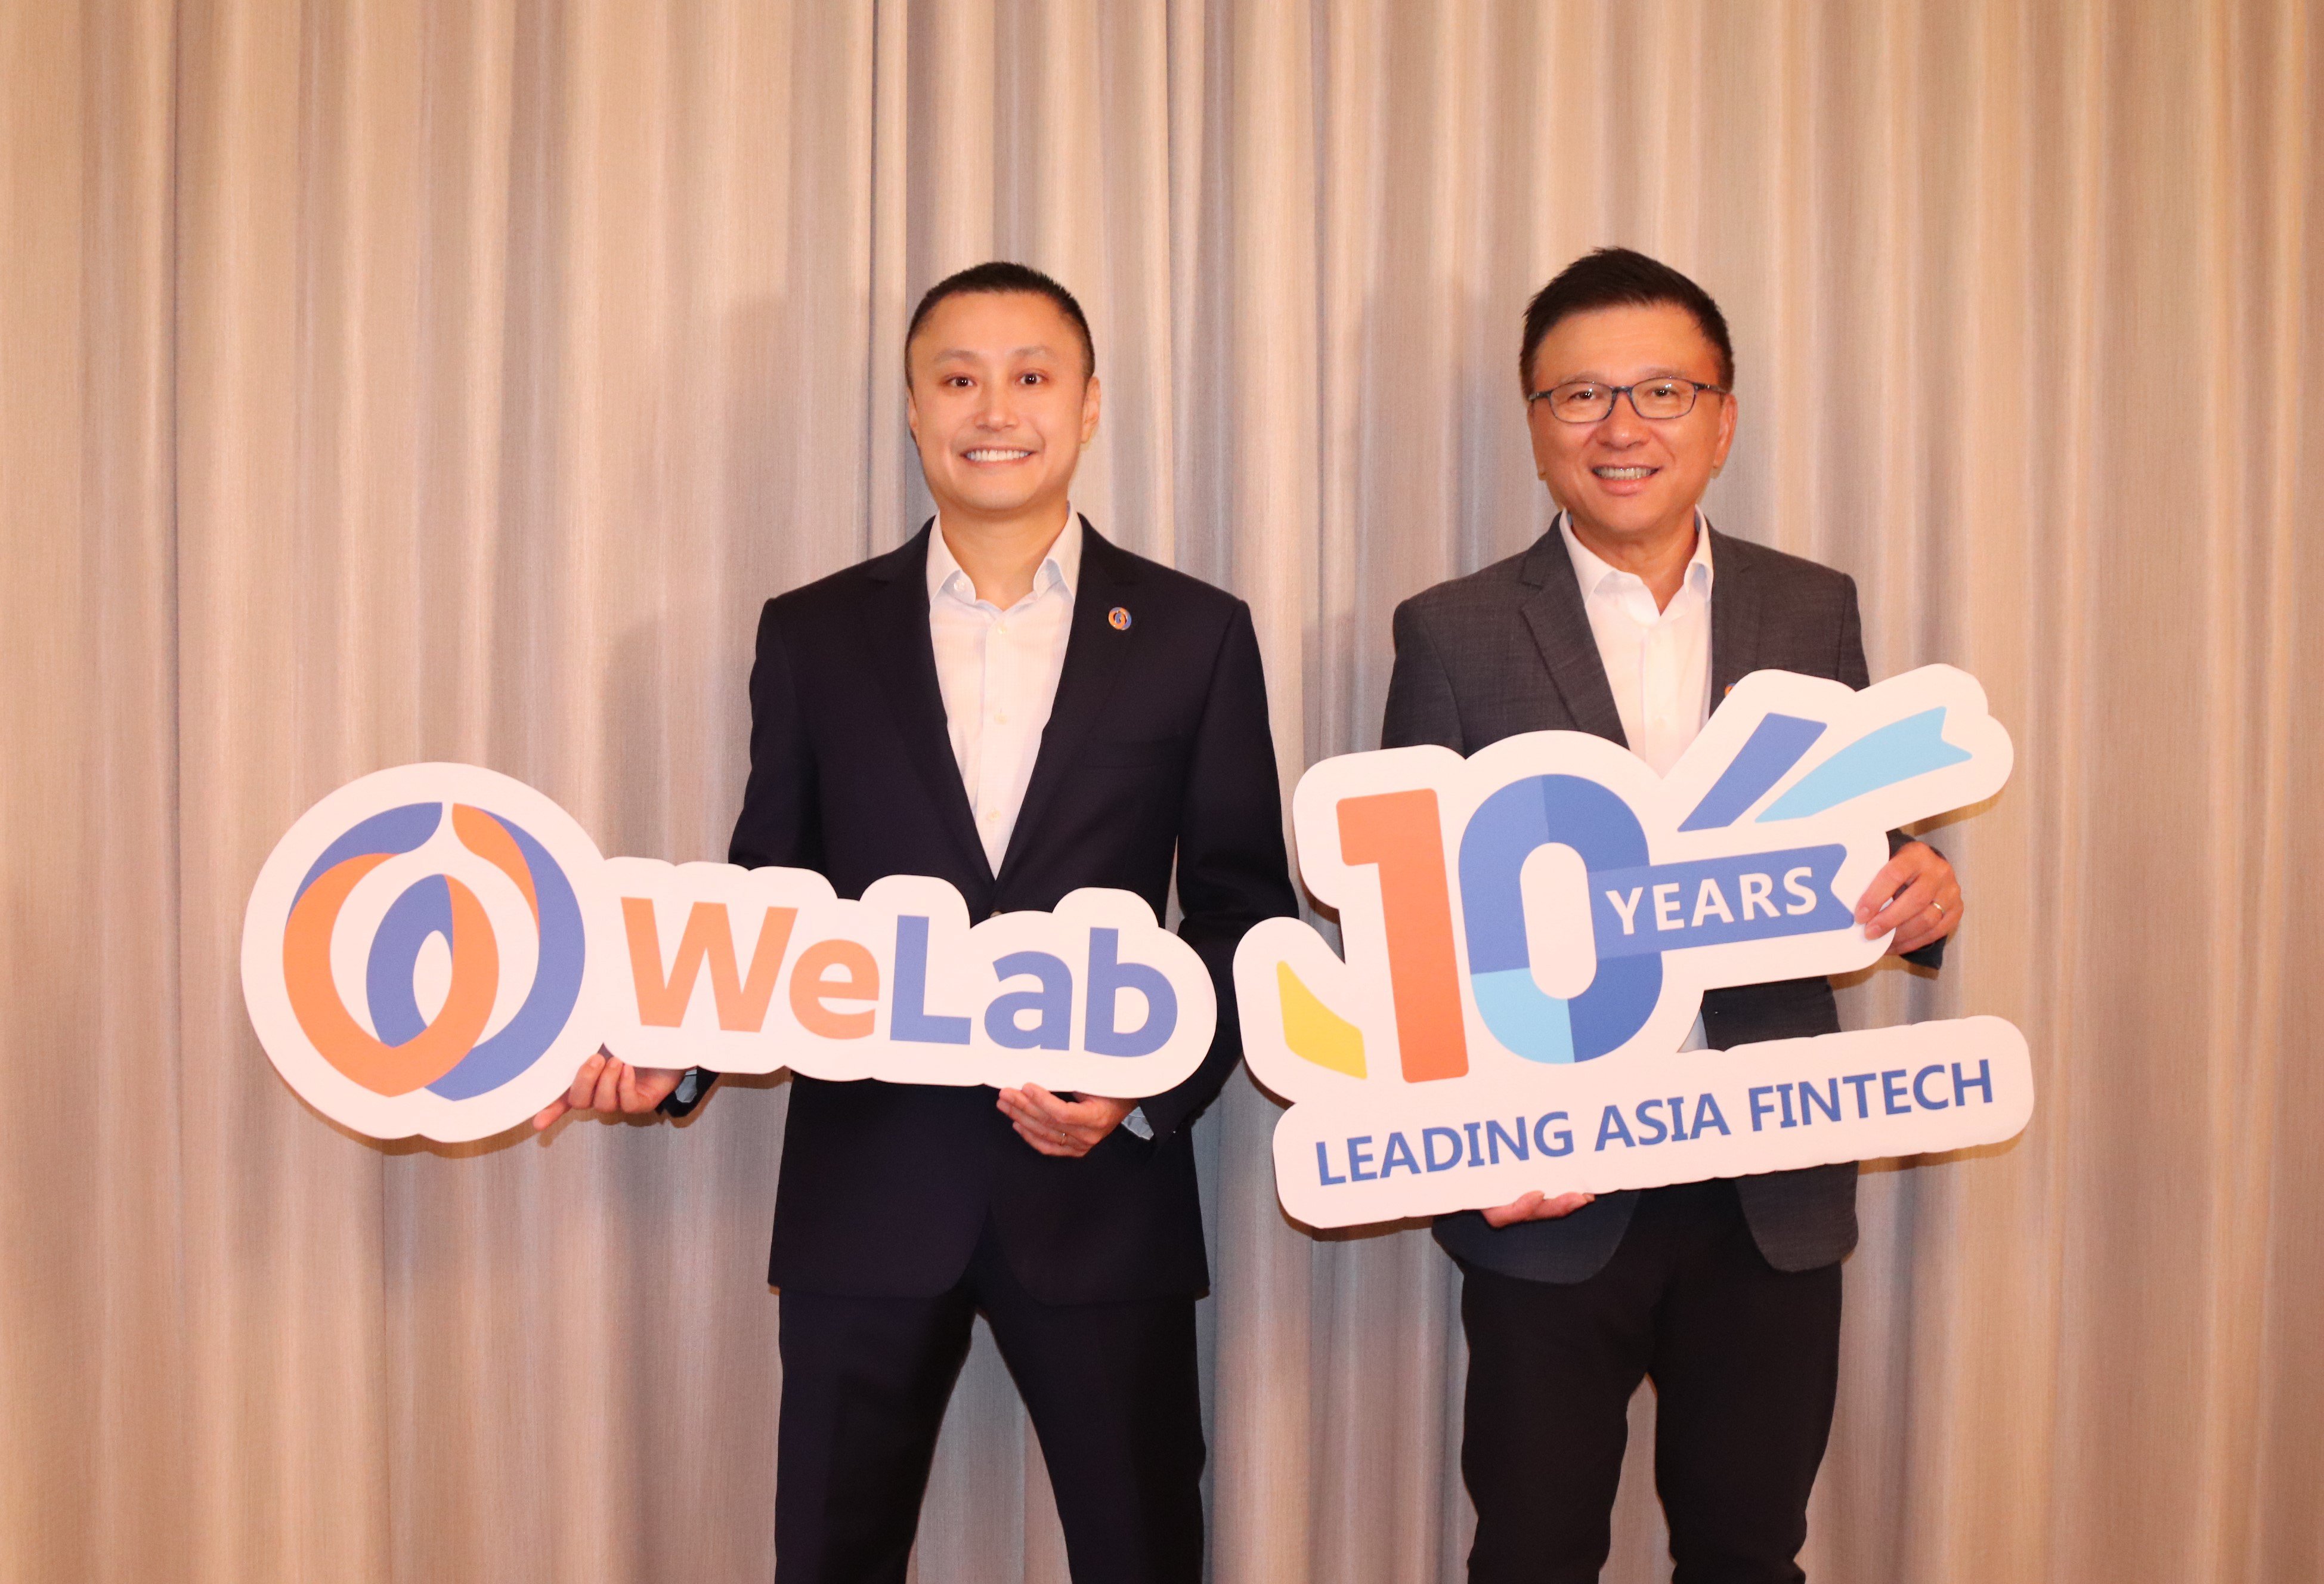 WeLab Founder and Group CEO Simon Loong (left) and WeLab Senior Advisor Professor KC Chan (right) are confident about the fintech opportunities in Asia.